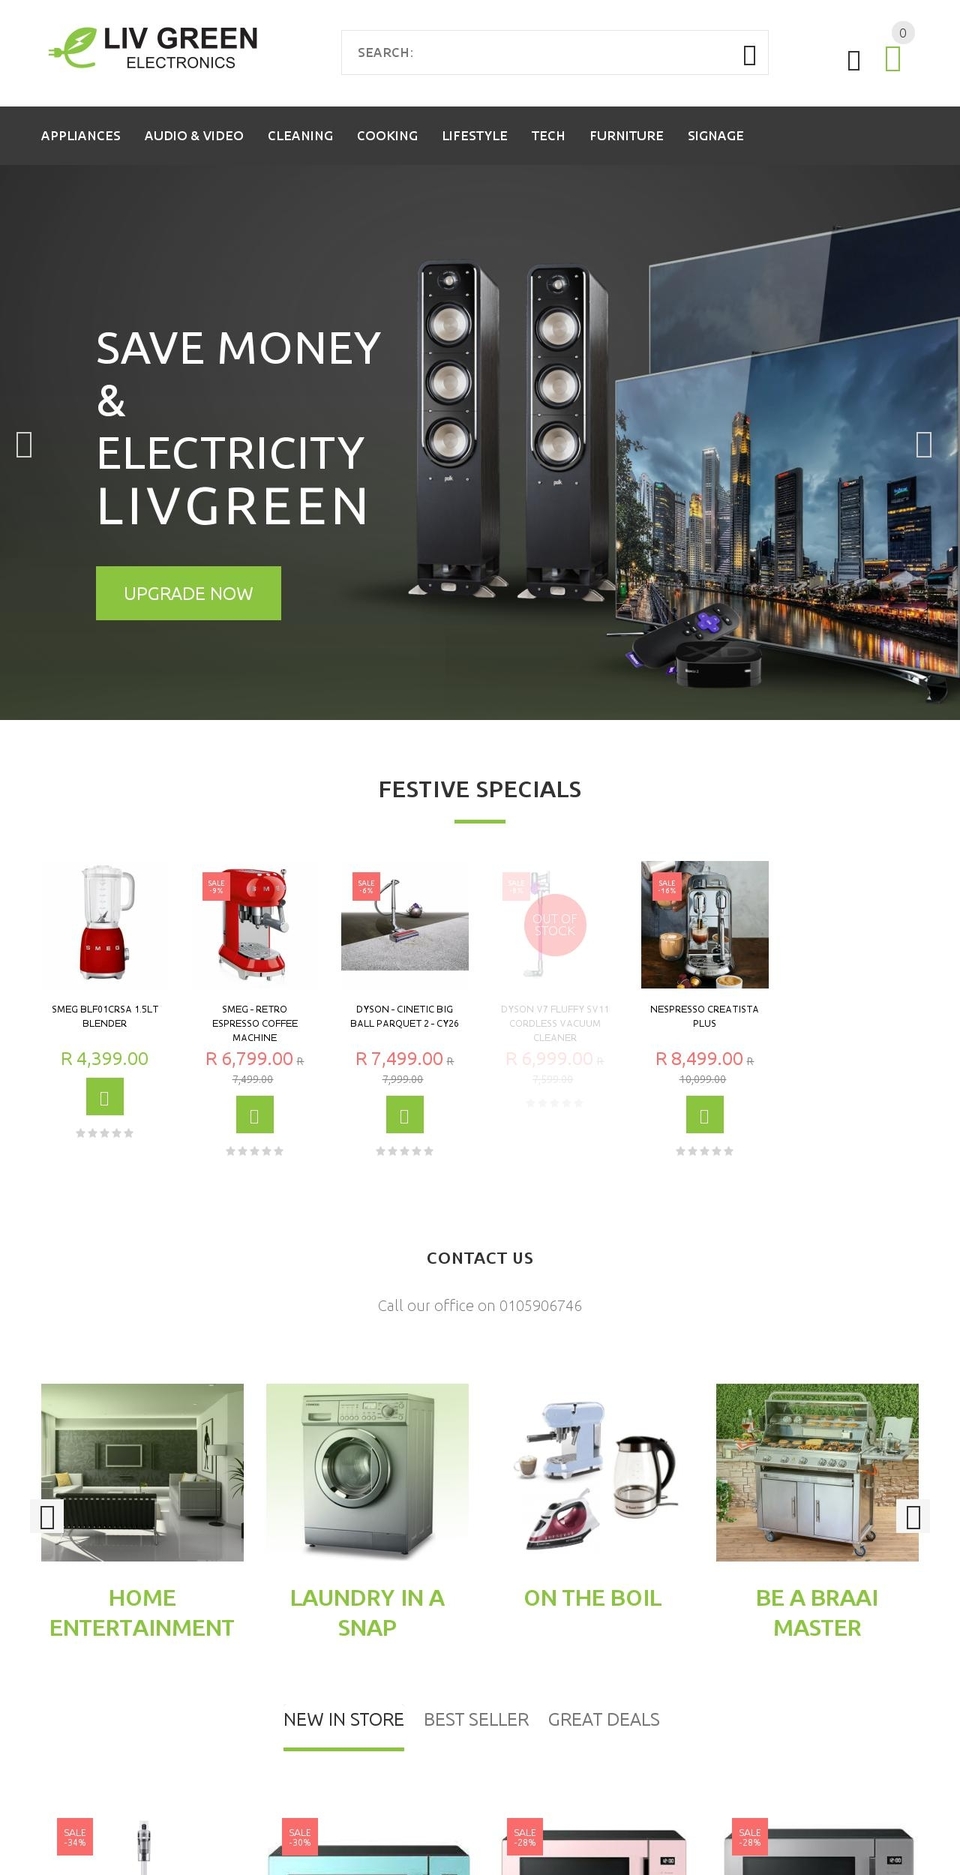 install-me-yourstore-v2-1-9 Shopify theme site example livgreen.co.za